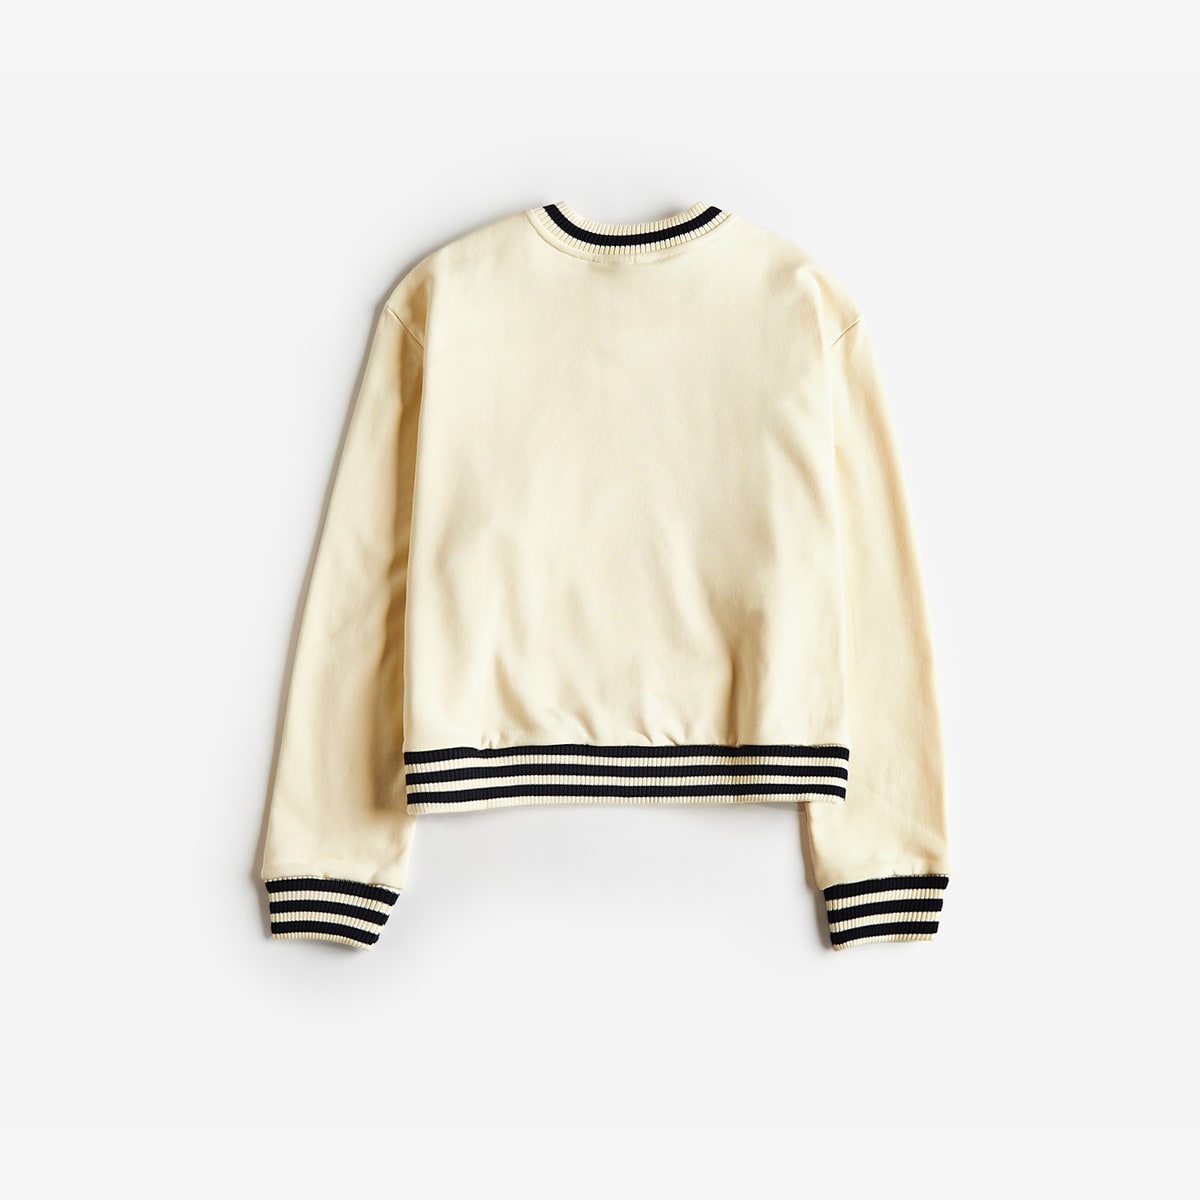 Adidas X Sporty & Rich V-Neck Sweater (Cream White) | END. Launches